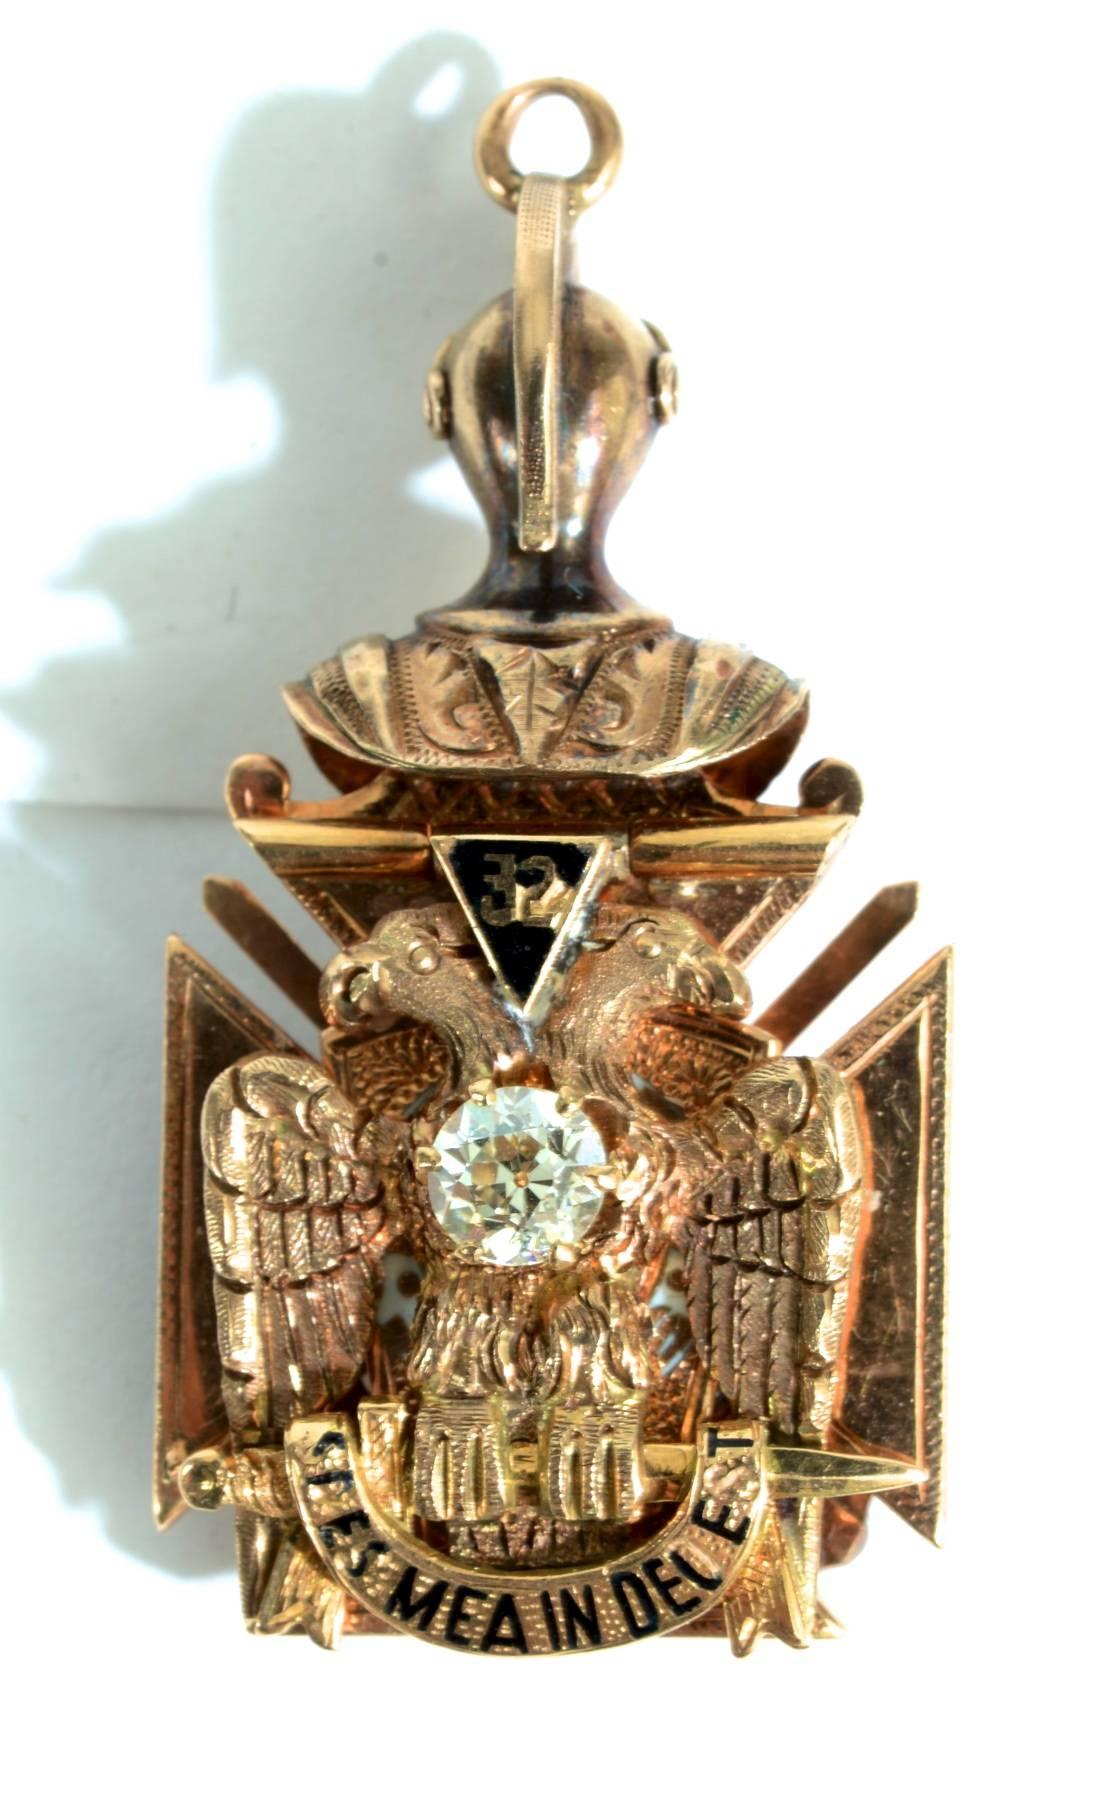 Antique 10K Yellow Gold Enamel Free Masons Masonic 32nd Degree, Knights Templar Bi-Fold Watch Fob Pendant Charm. A heavy solid gold bi-fold with symbols, engravings and enamel. The back features the two headed eagle and the 32nd degree in black